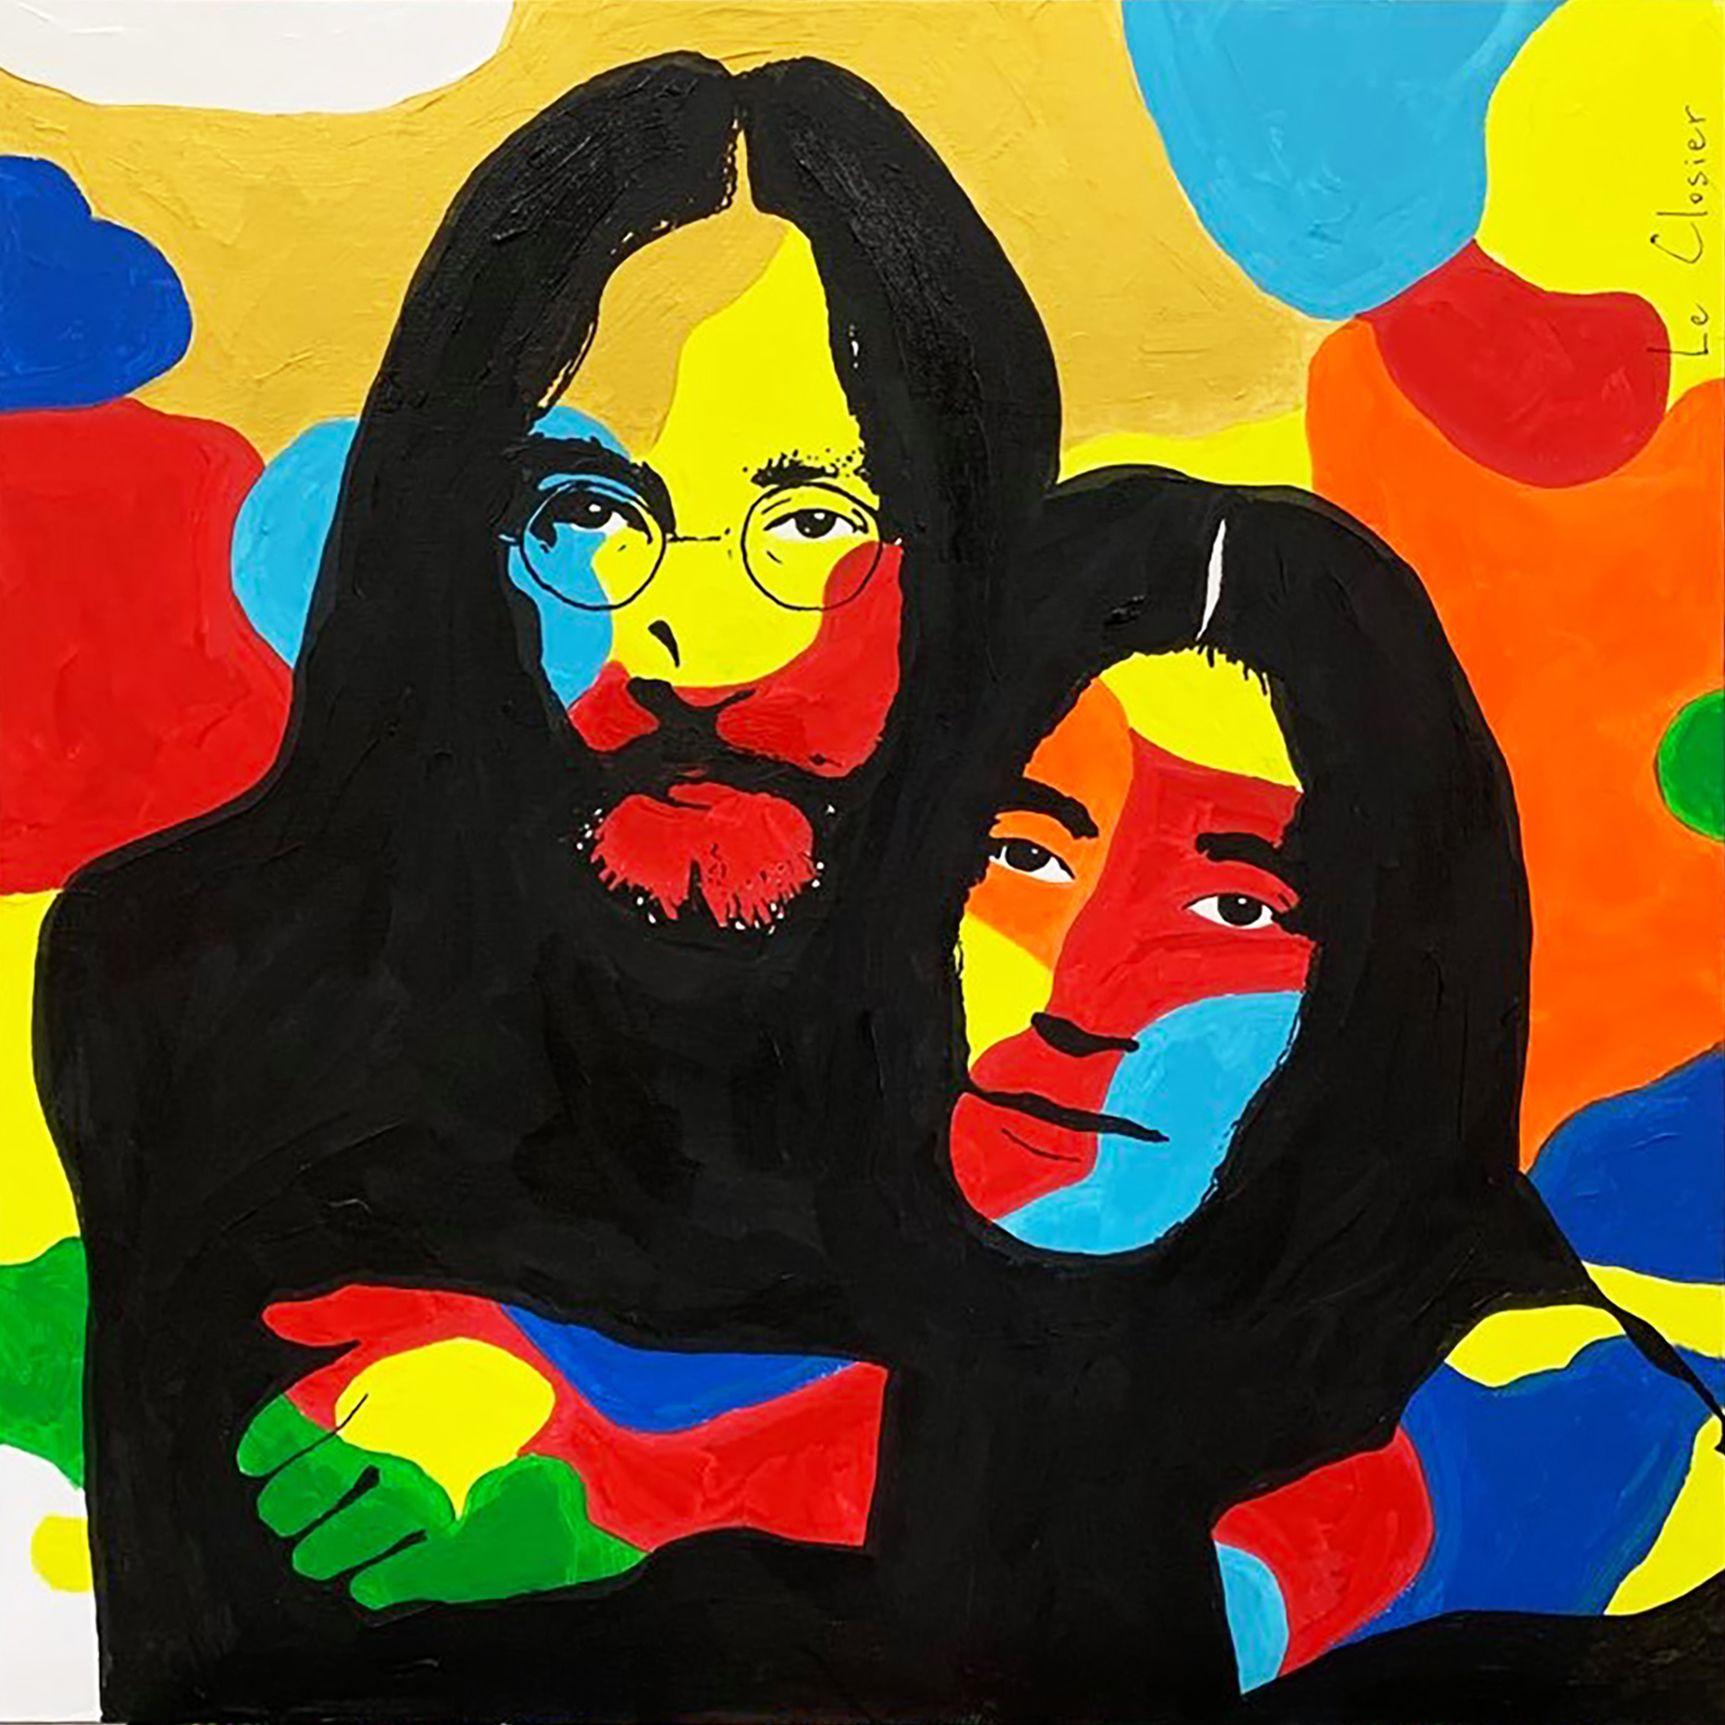 John Lennon and Yoko Ono.  Acrylic and spray paint on canvas.  30in x 30in (76cm x 76cm).  Ready to hang. :: Painting :: Pop-Art :: This piece comes with an official certificate of authenticity signed by the artist :: Ready to Hang: Yes :: Signed: